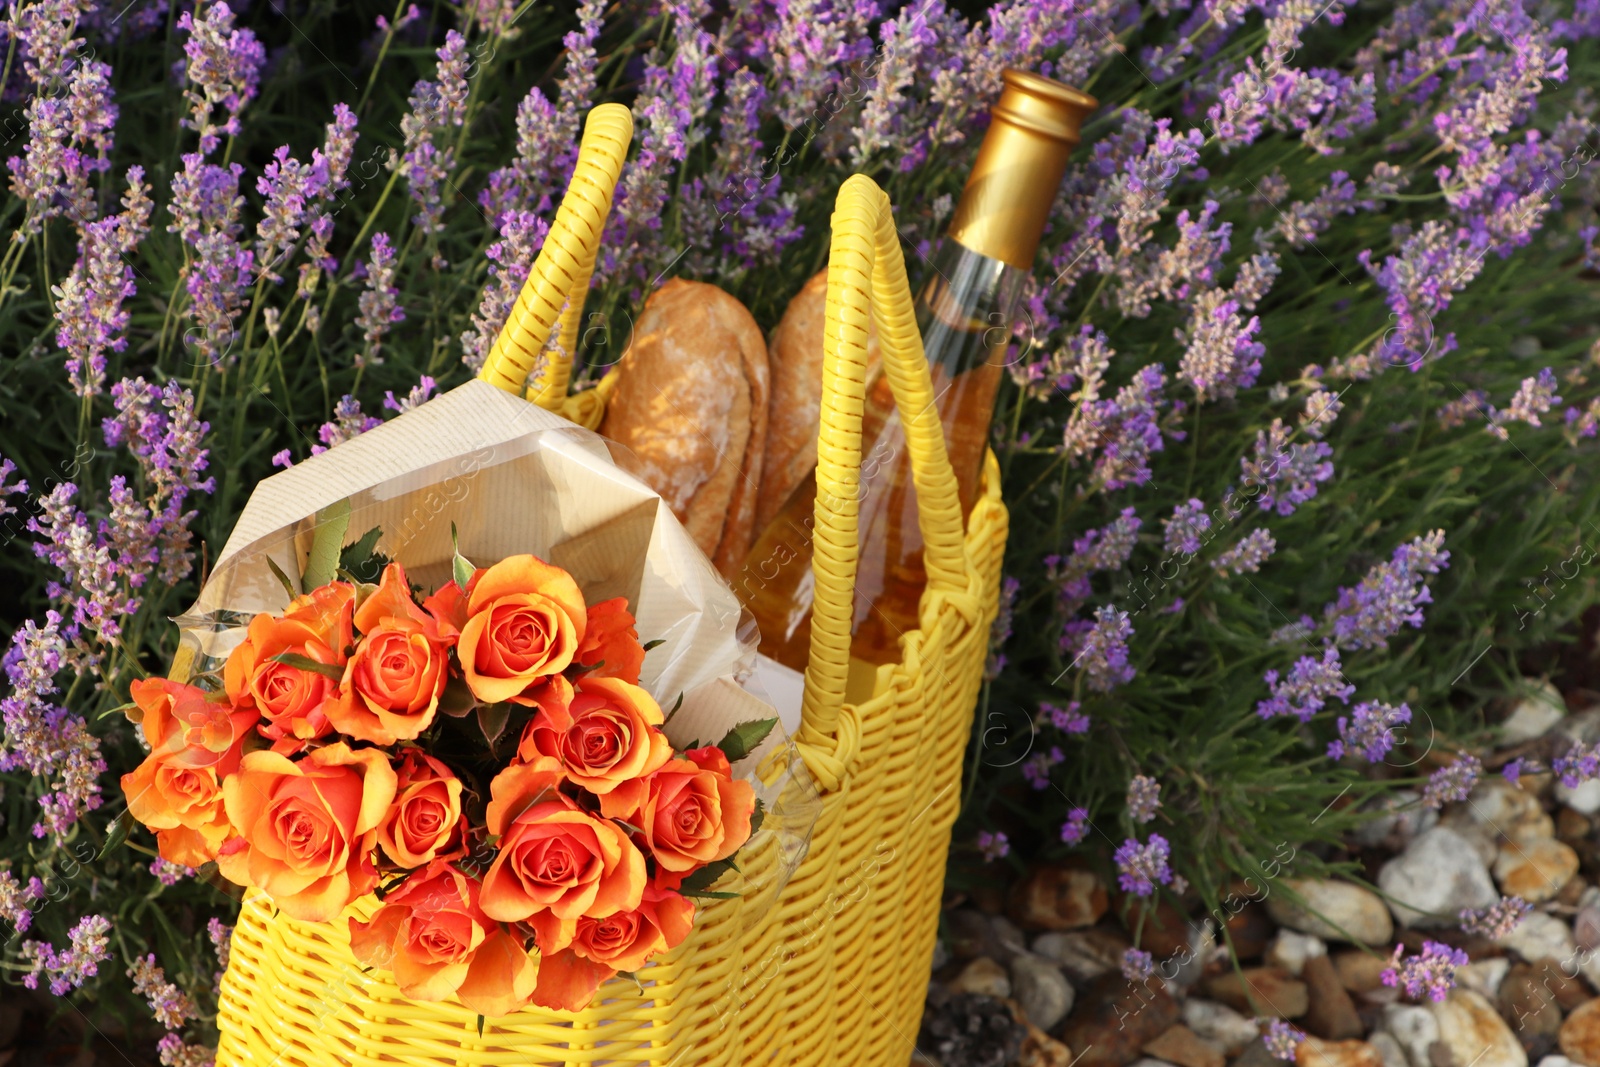 Photo of Yellow wicker bag with beautiful roses, bottle of wine and baguettes near lavender flowers outdoors